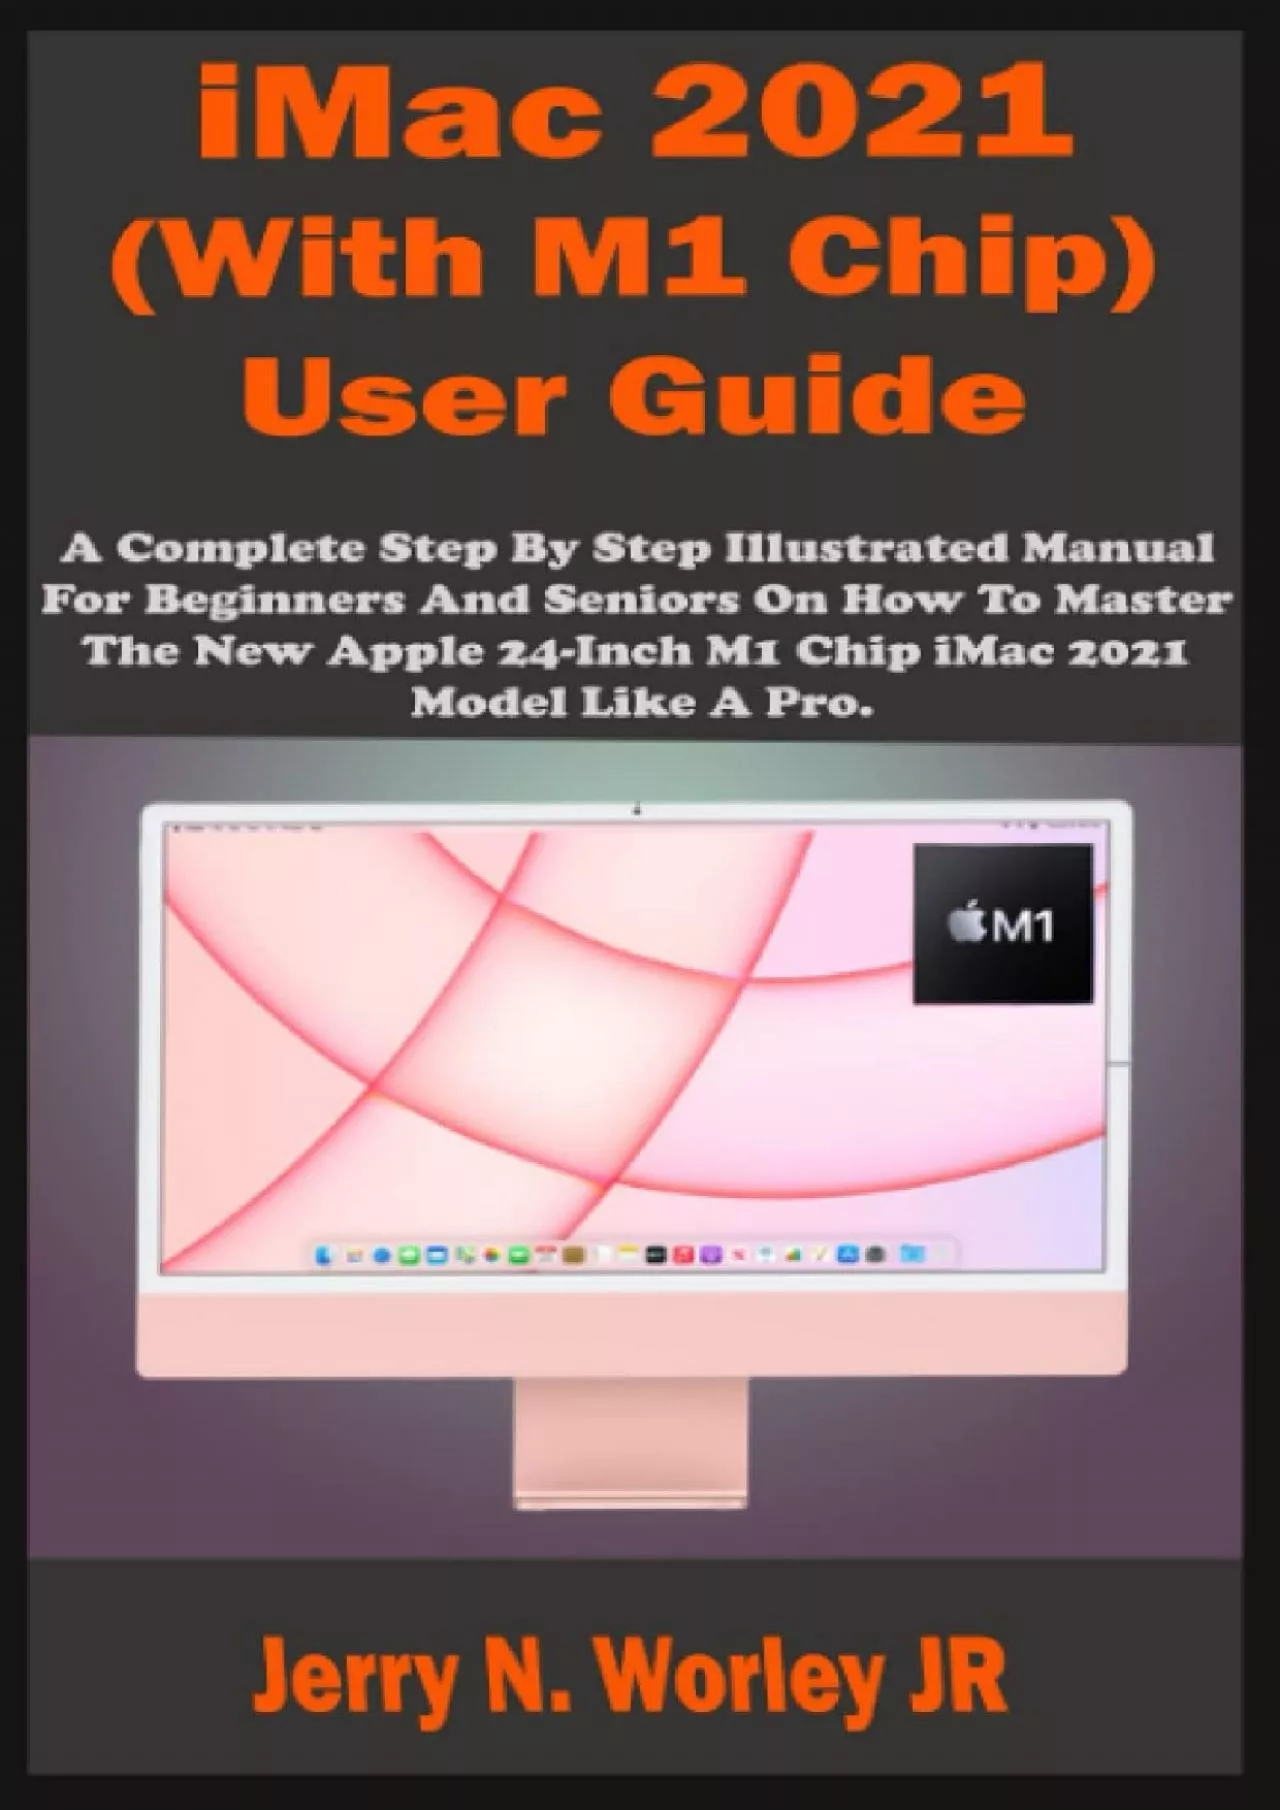 iMac 2021 (With M1 Chip) User Guide: A Complete Step By Step Illustrated Manual For Beginners